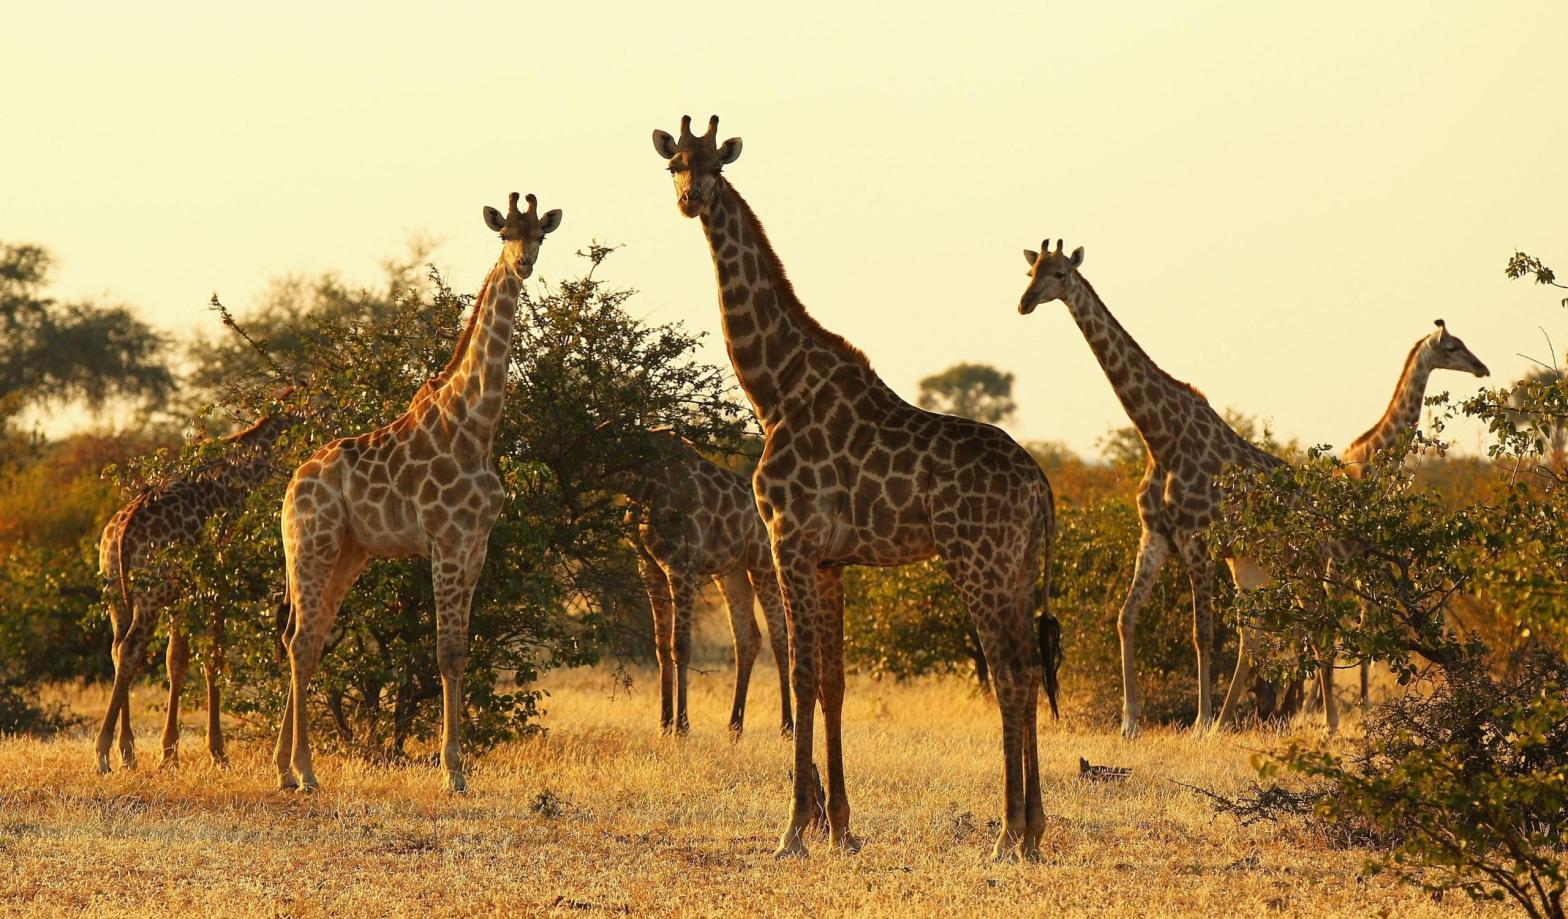 A tower of giraffes in Botswana in 2010. (Photo: Cameron Spencer, Getty Images)